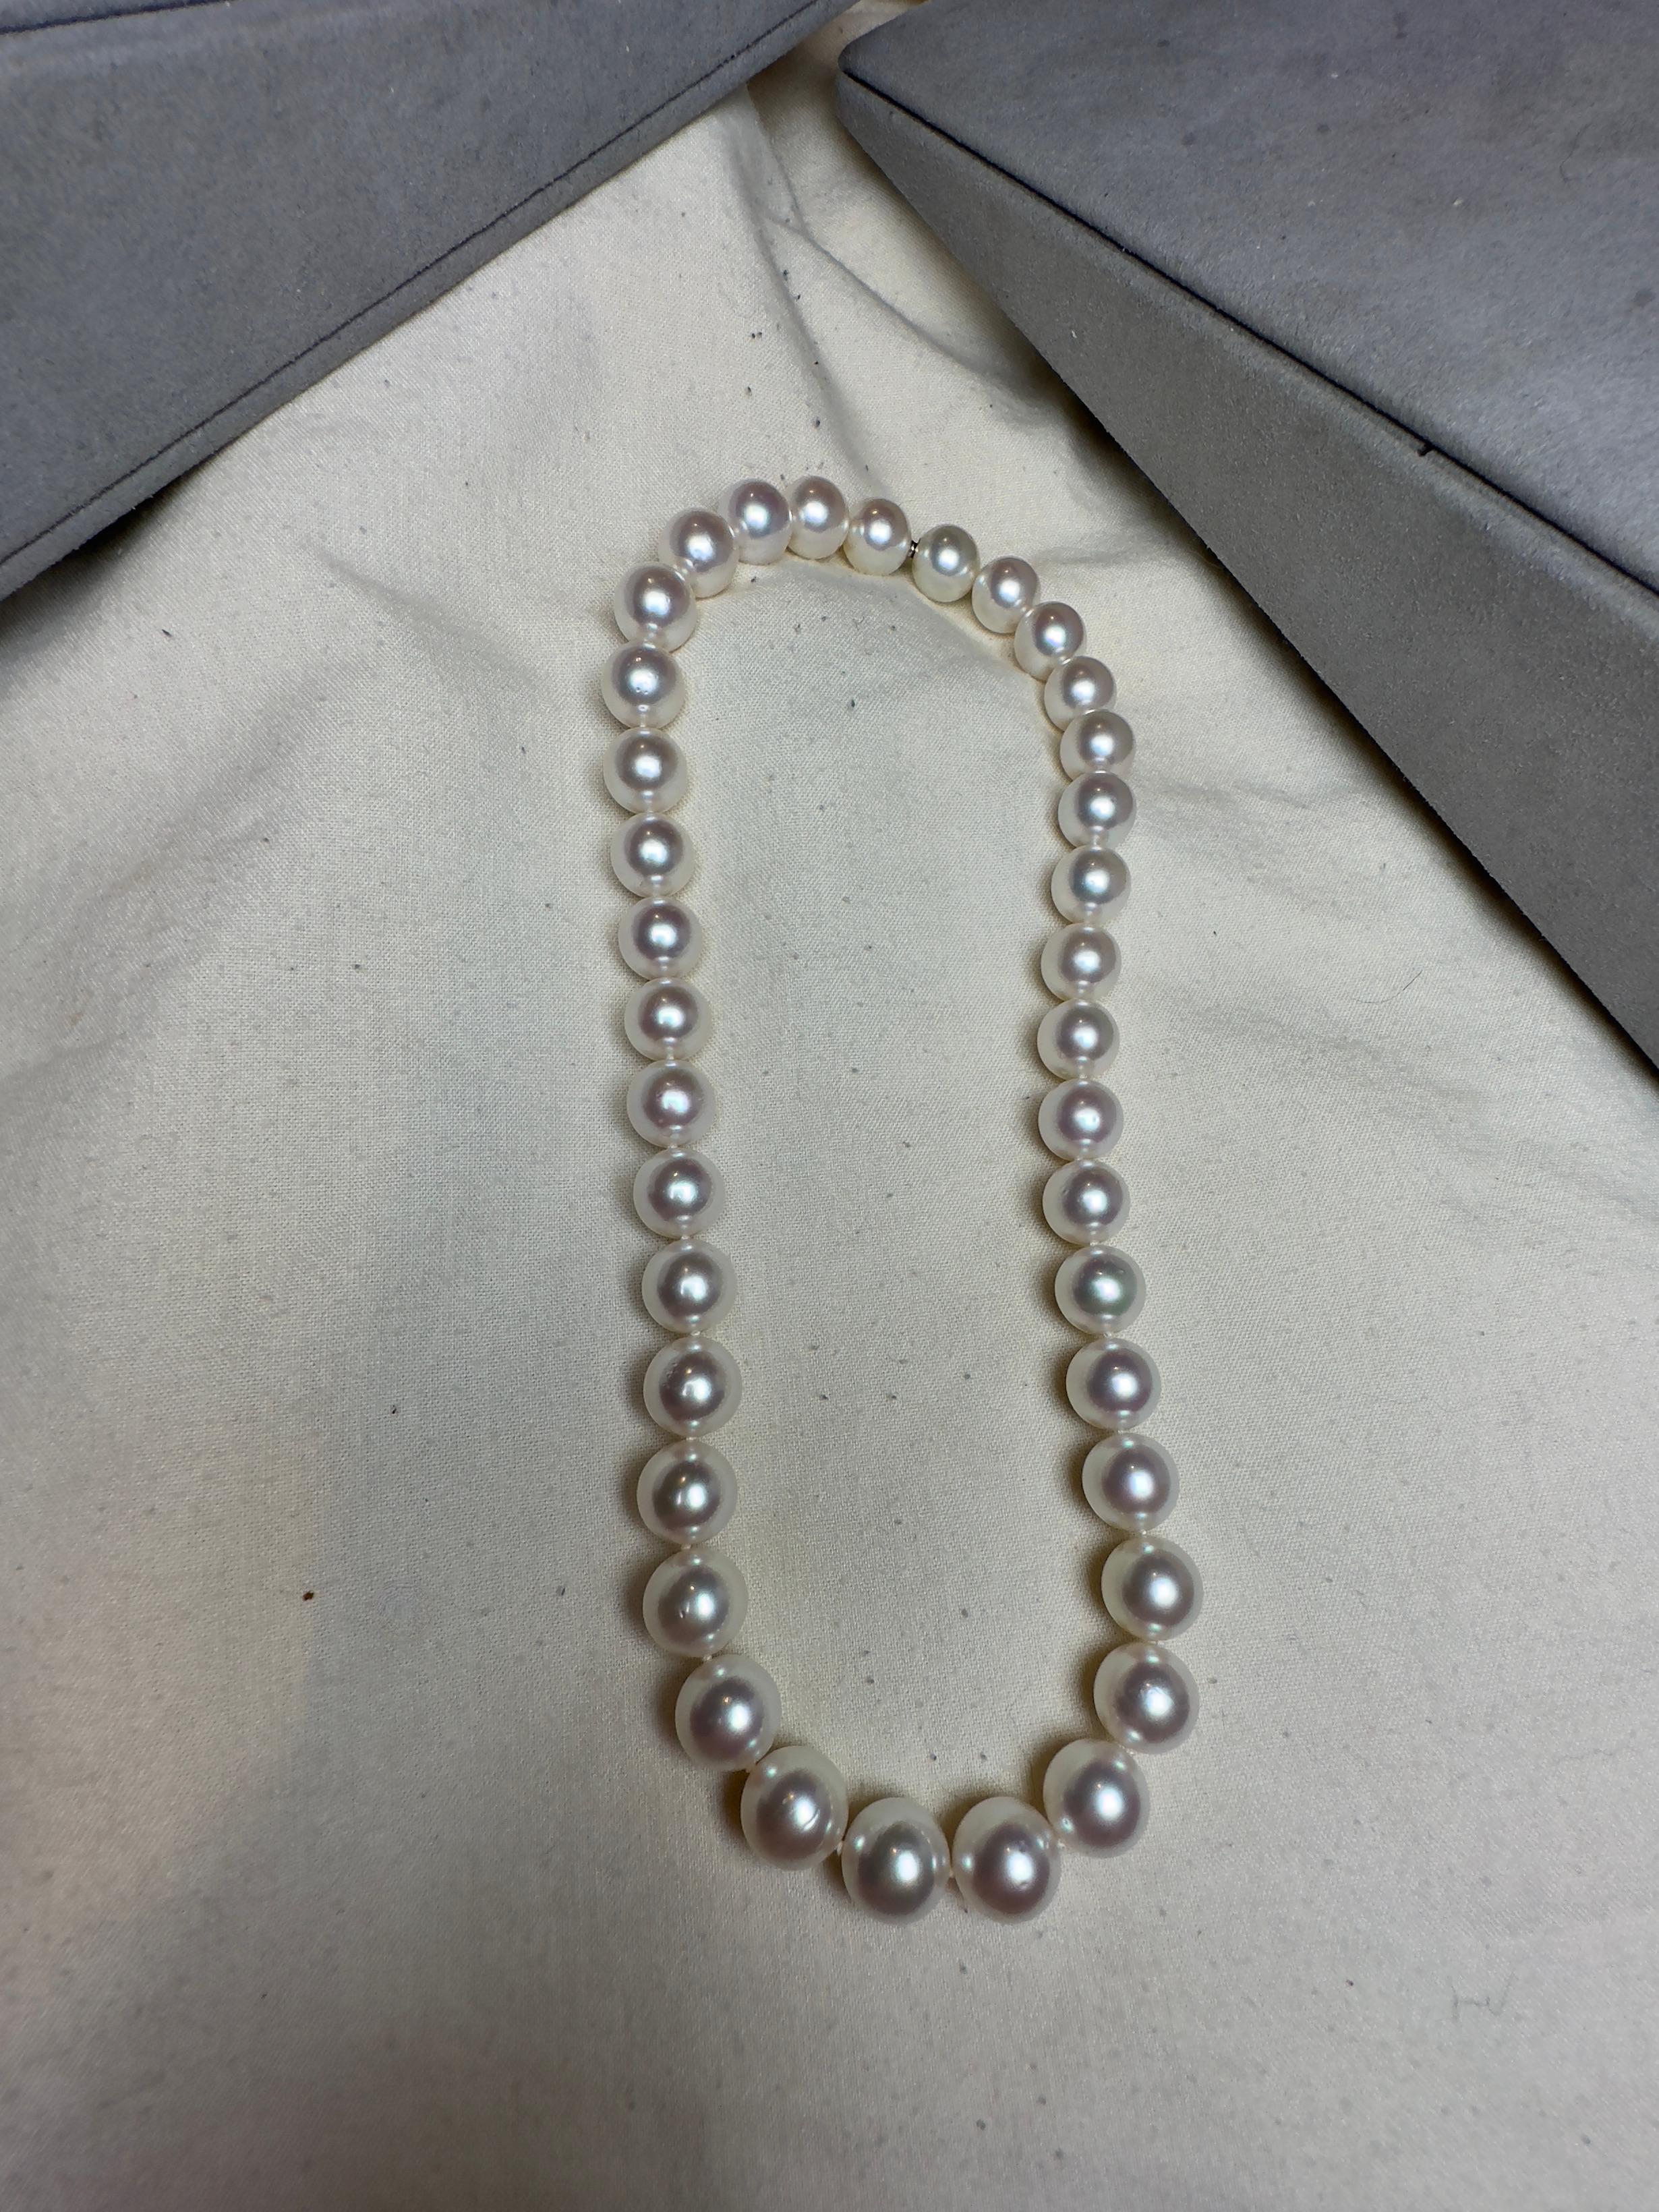 


A strand of Cultured Australian South Sea pearls


GUARANTEED NATURAL COLOUR AND LUSTRE

These pearls display their natural colour and lustre and have not been subjected to chemical enhancements or processes.
SUSTAINABLE

Australian South Sea